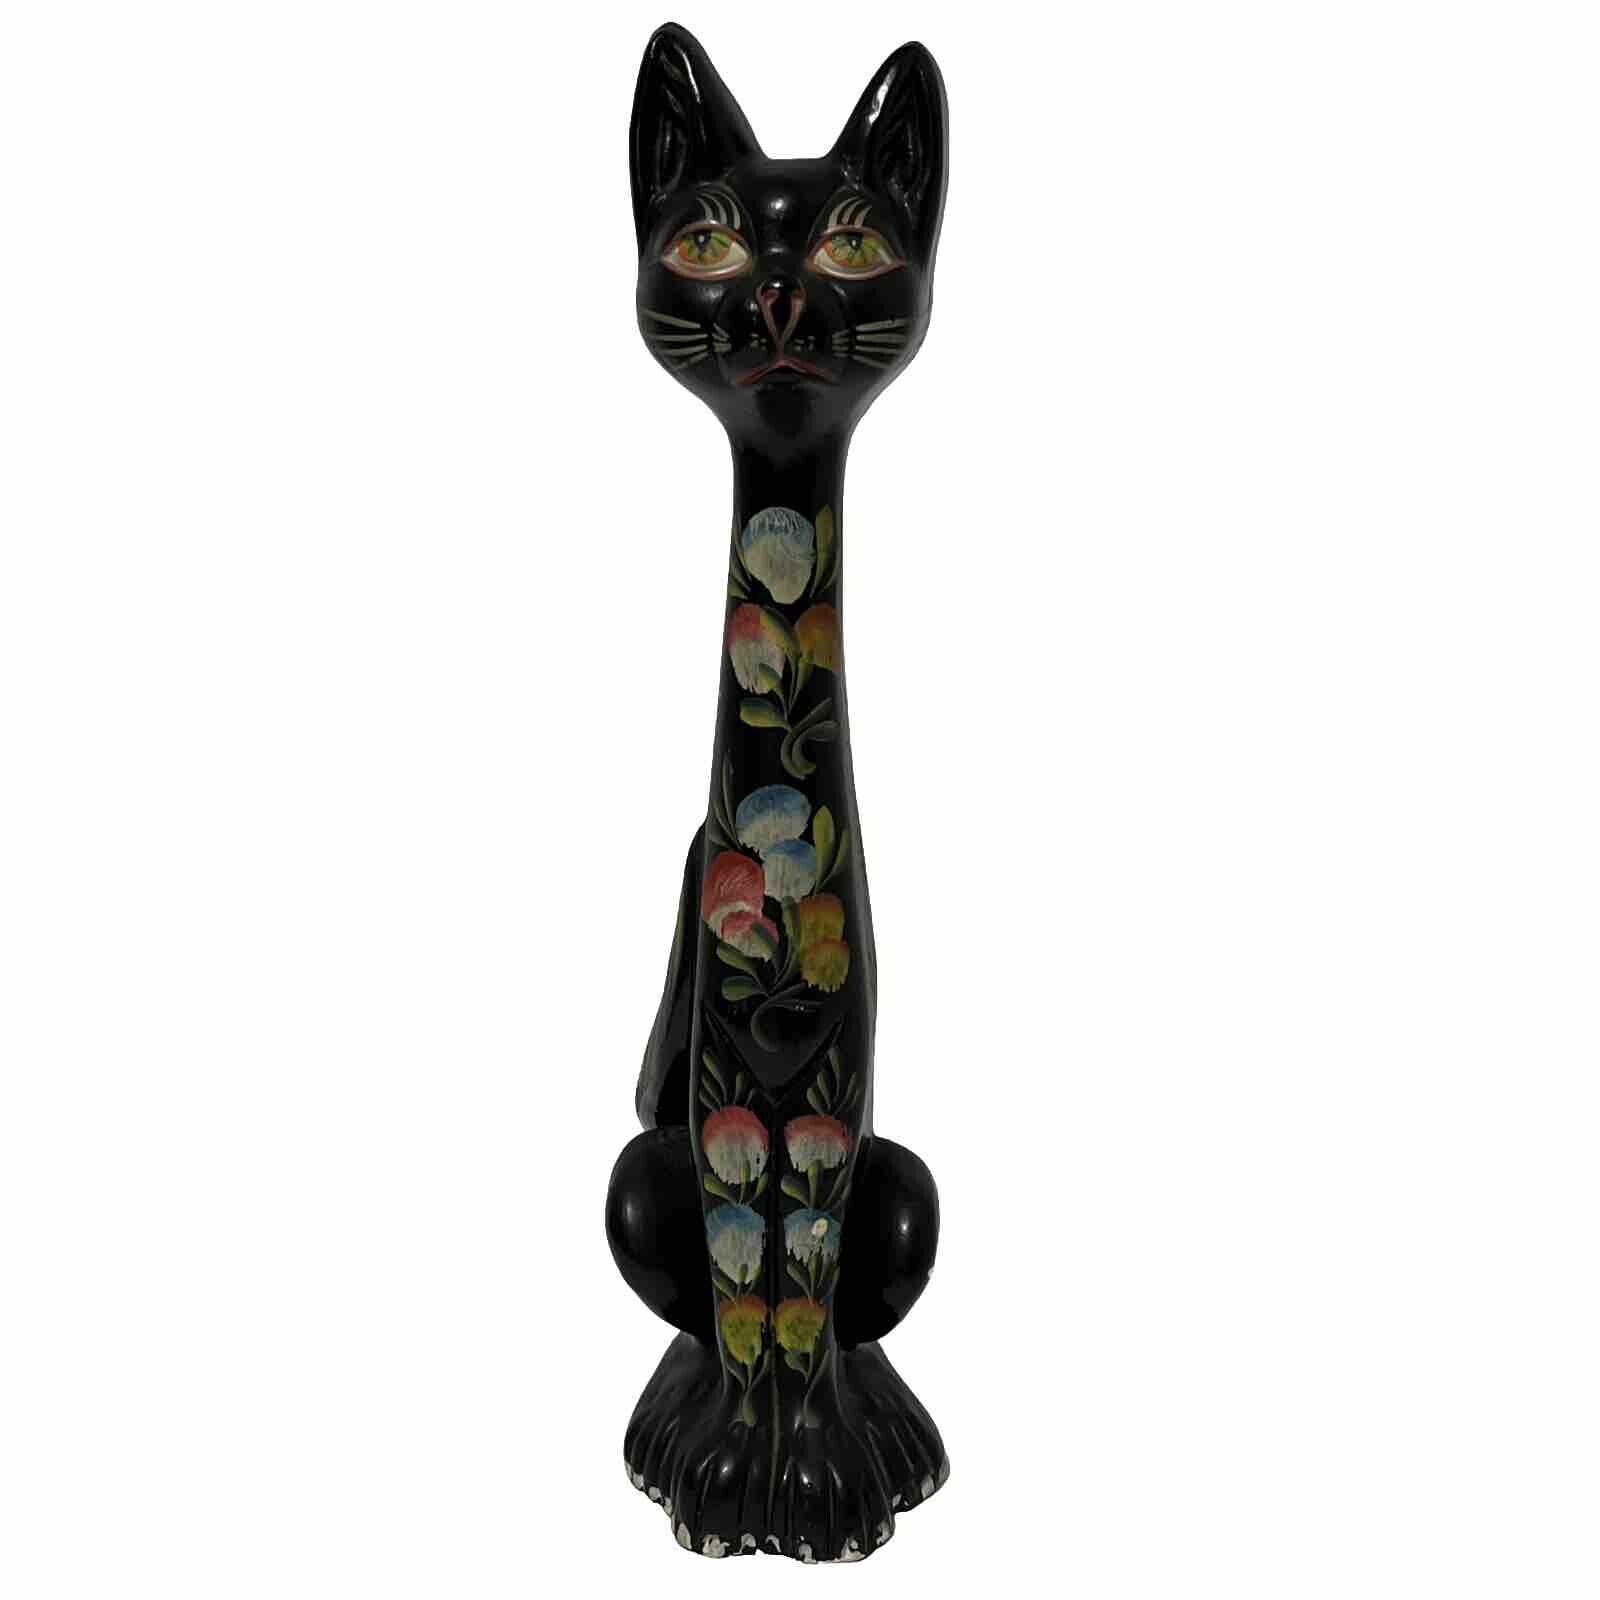 Vintage MCM Tall Long Neck Cat Statue Hand Painted Floral 13”